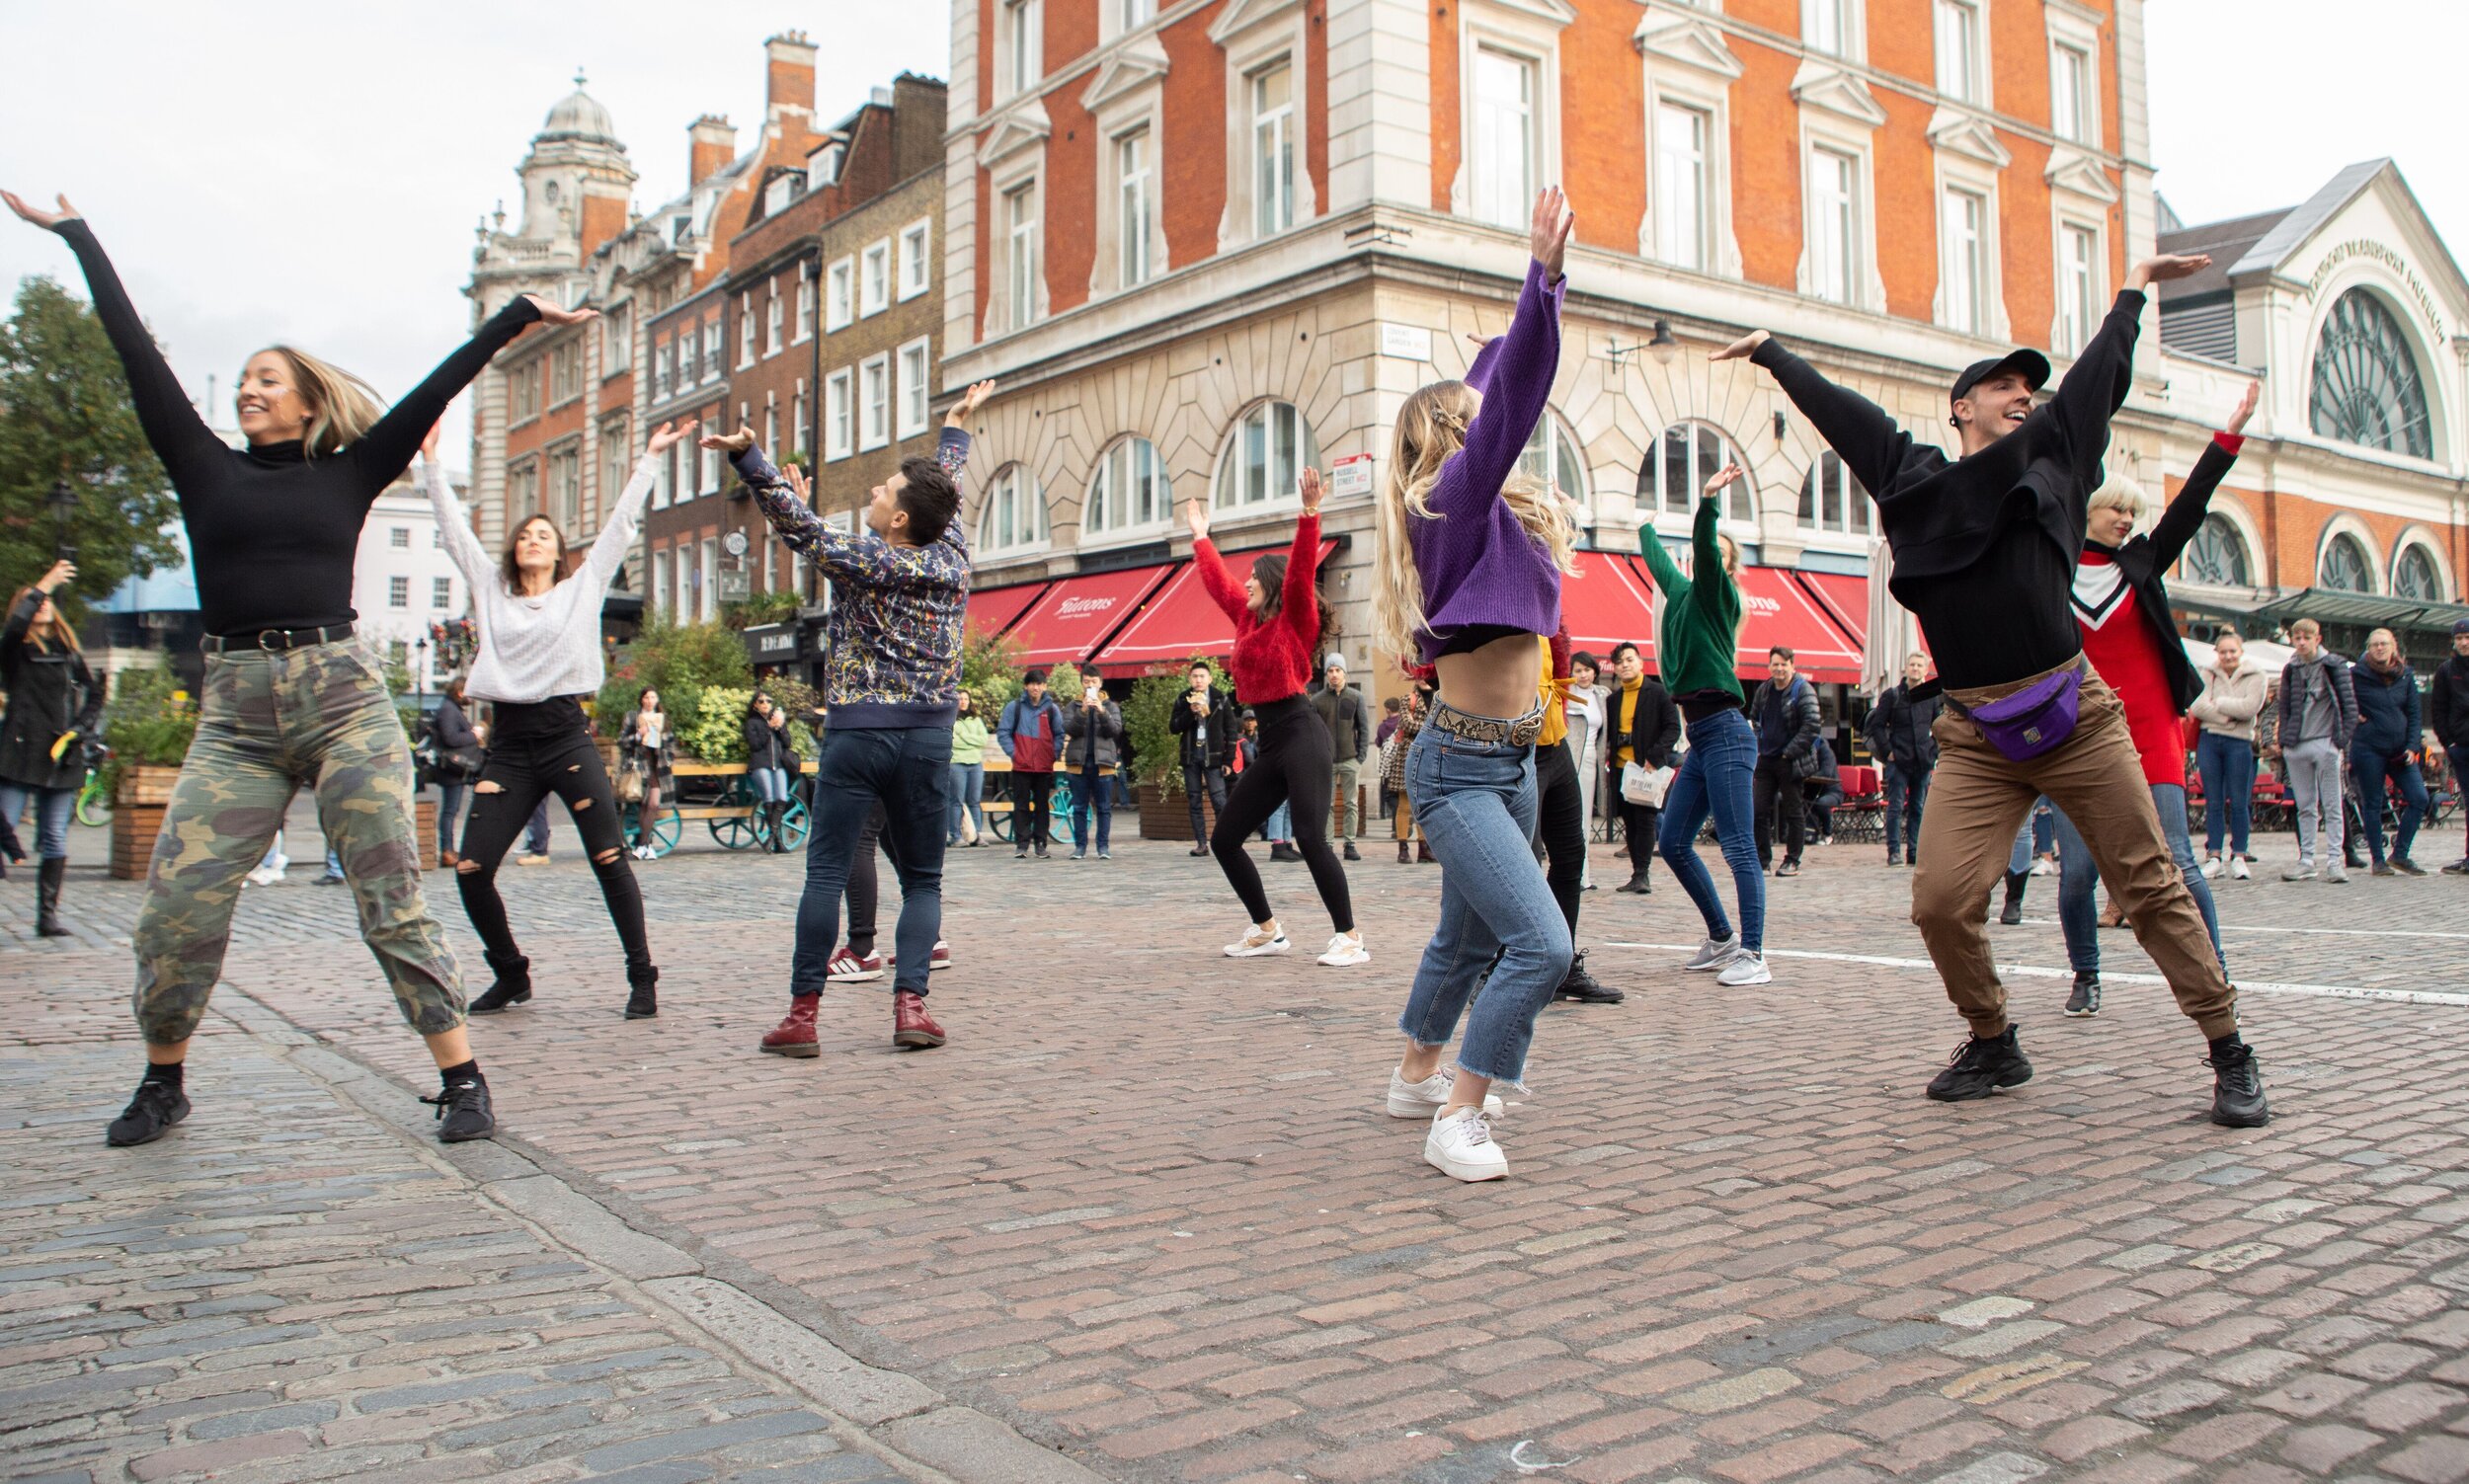 Flash mob performing at event